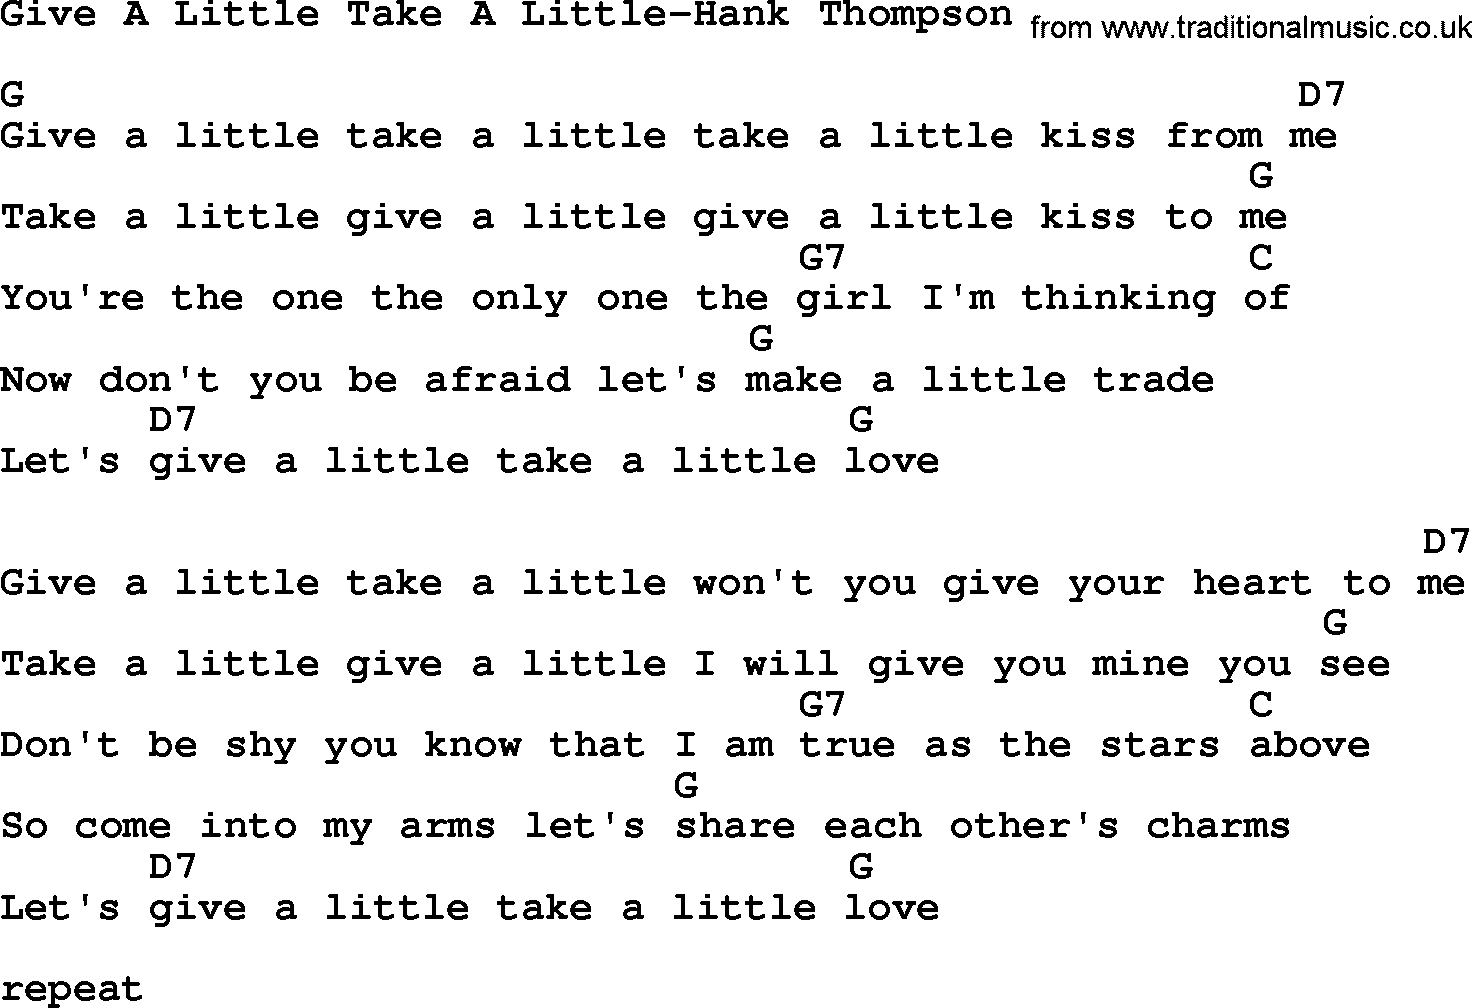 Country music song: Give A Little Take A Little-Hank Thompson lyrics and chords